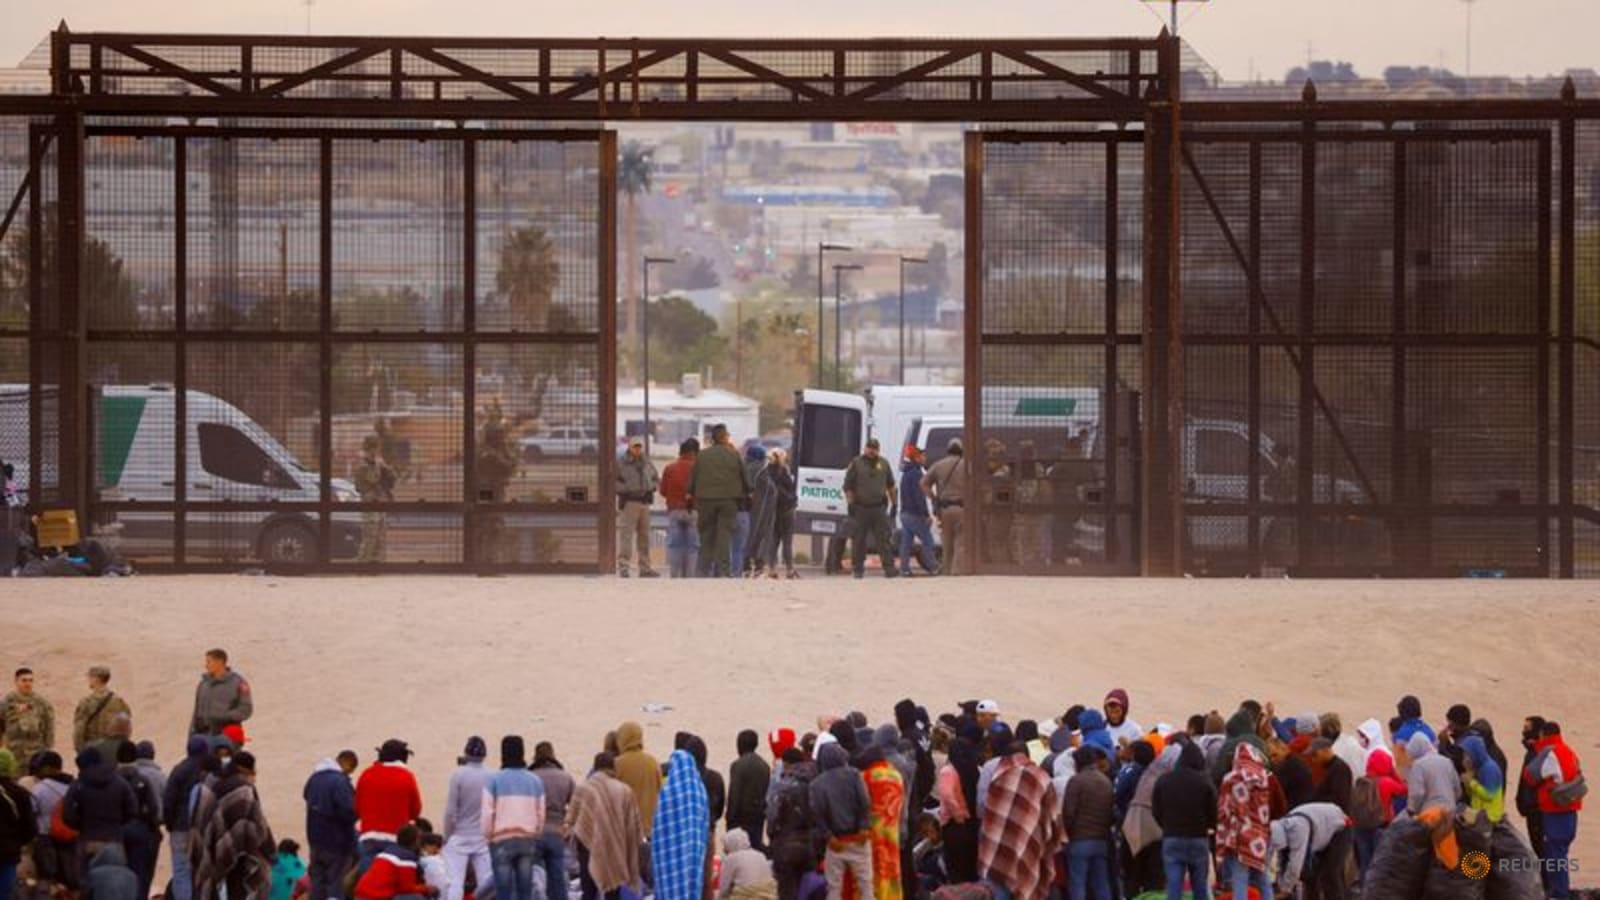 us-to-test-faster-asylum-screenings-for-migrants-crossing-border-illegally